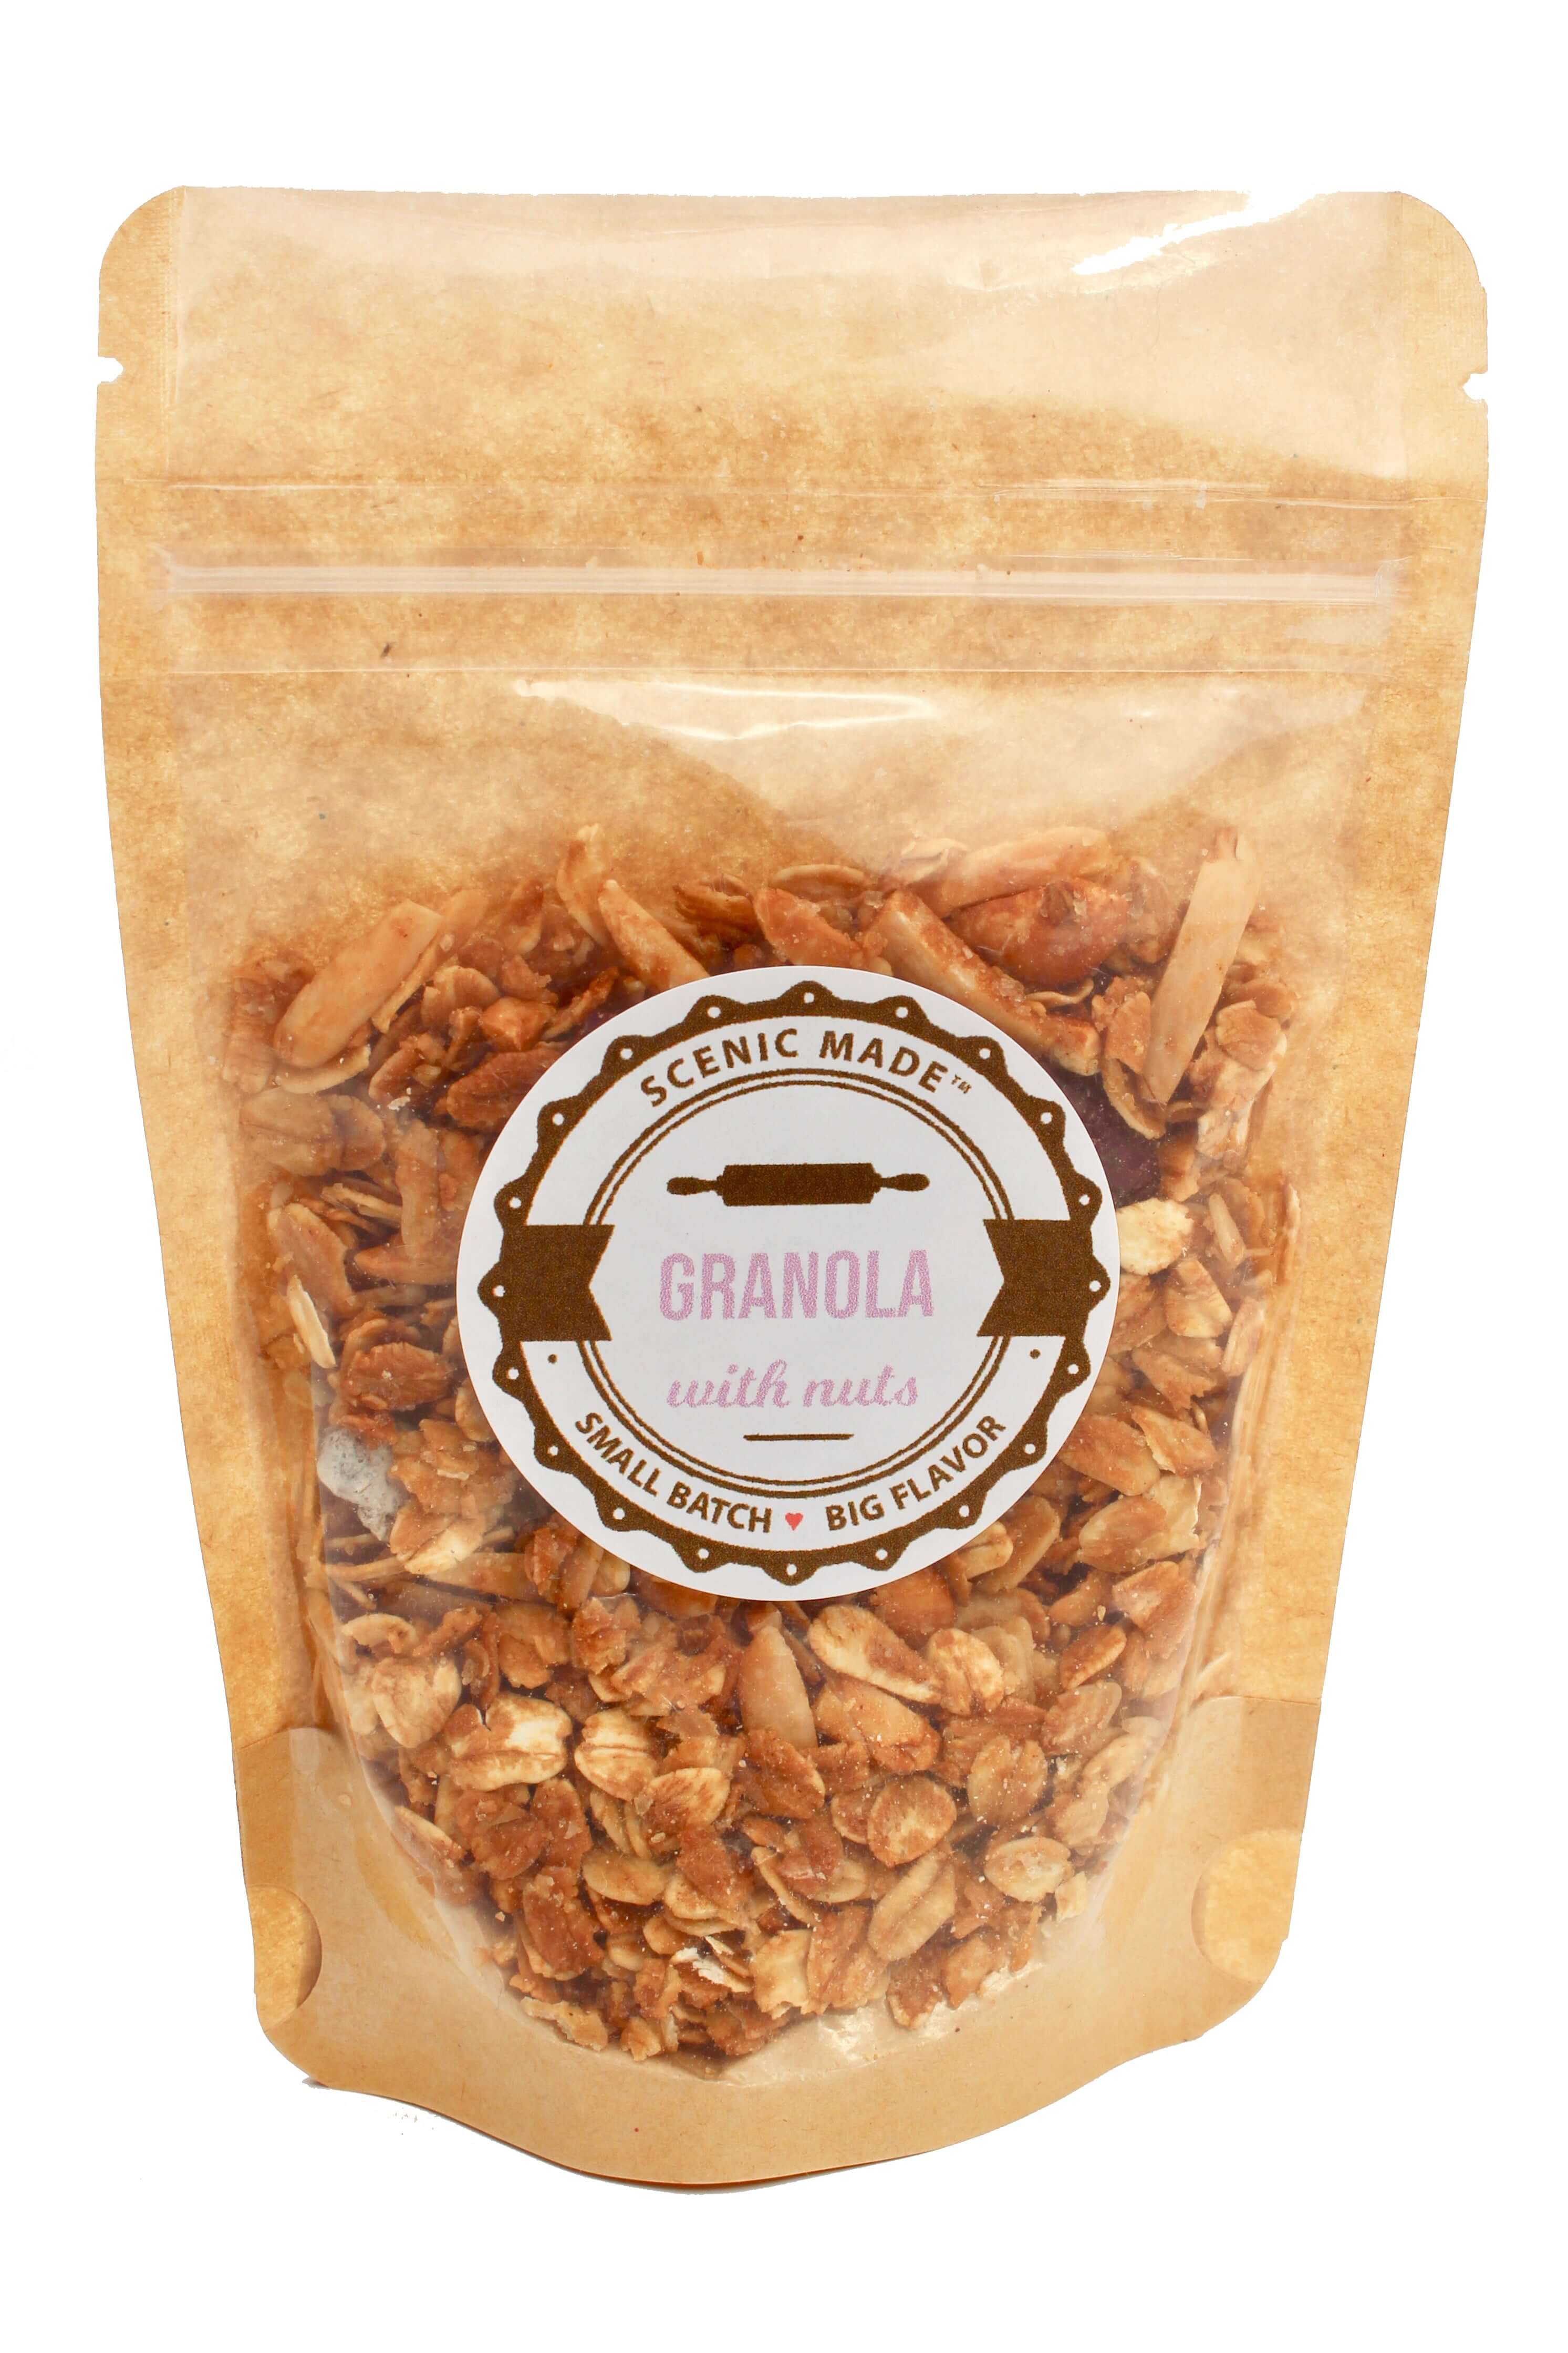 Our delicious, crunchy granola, packed in a food safe kraft bag with a clear front, labeled with a sticker.